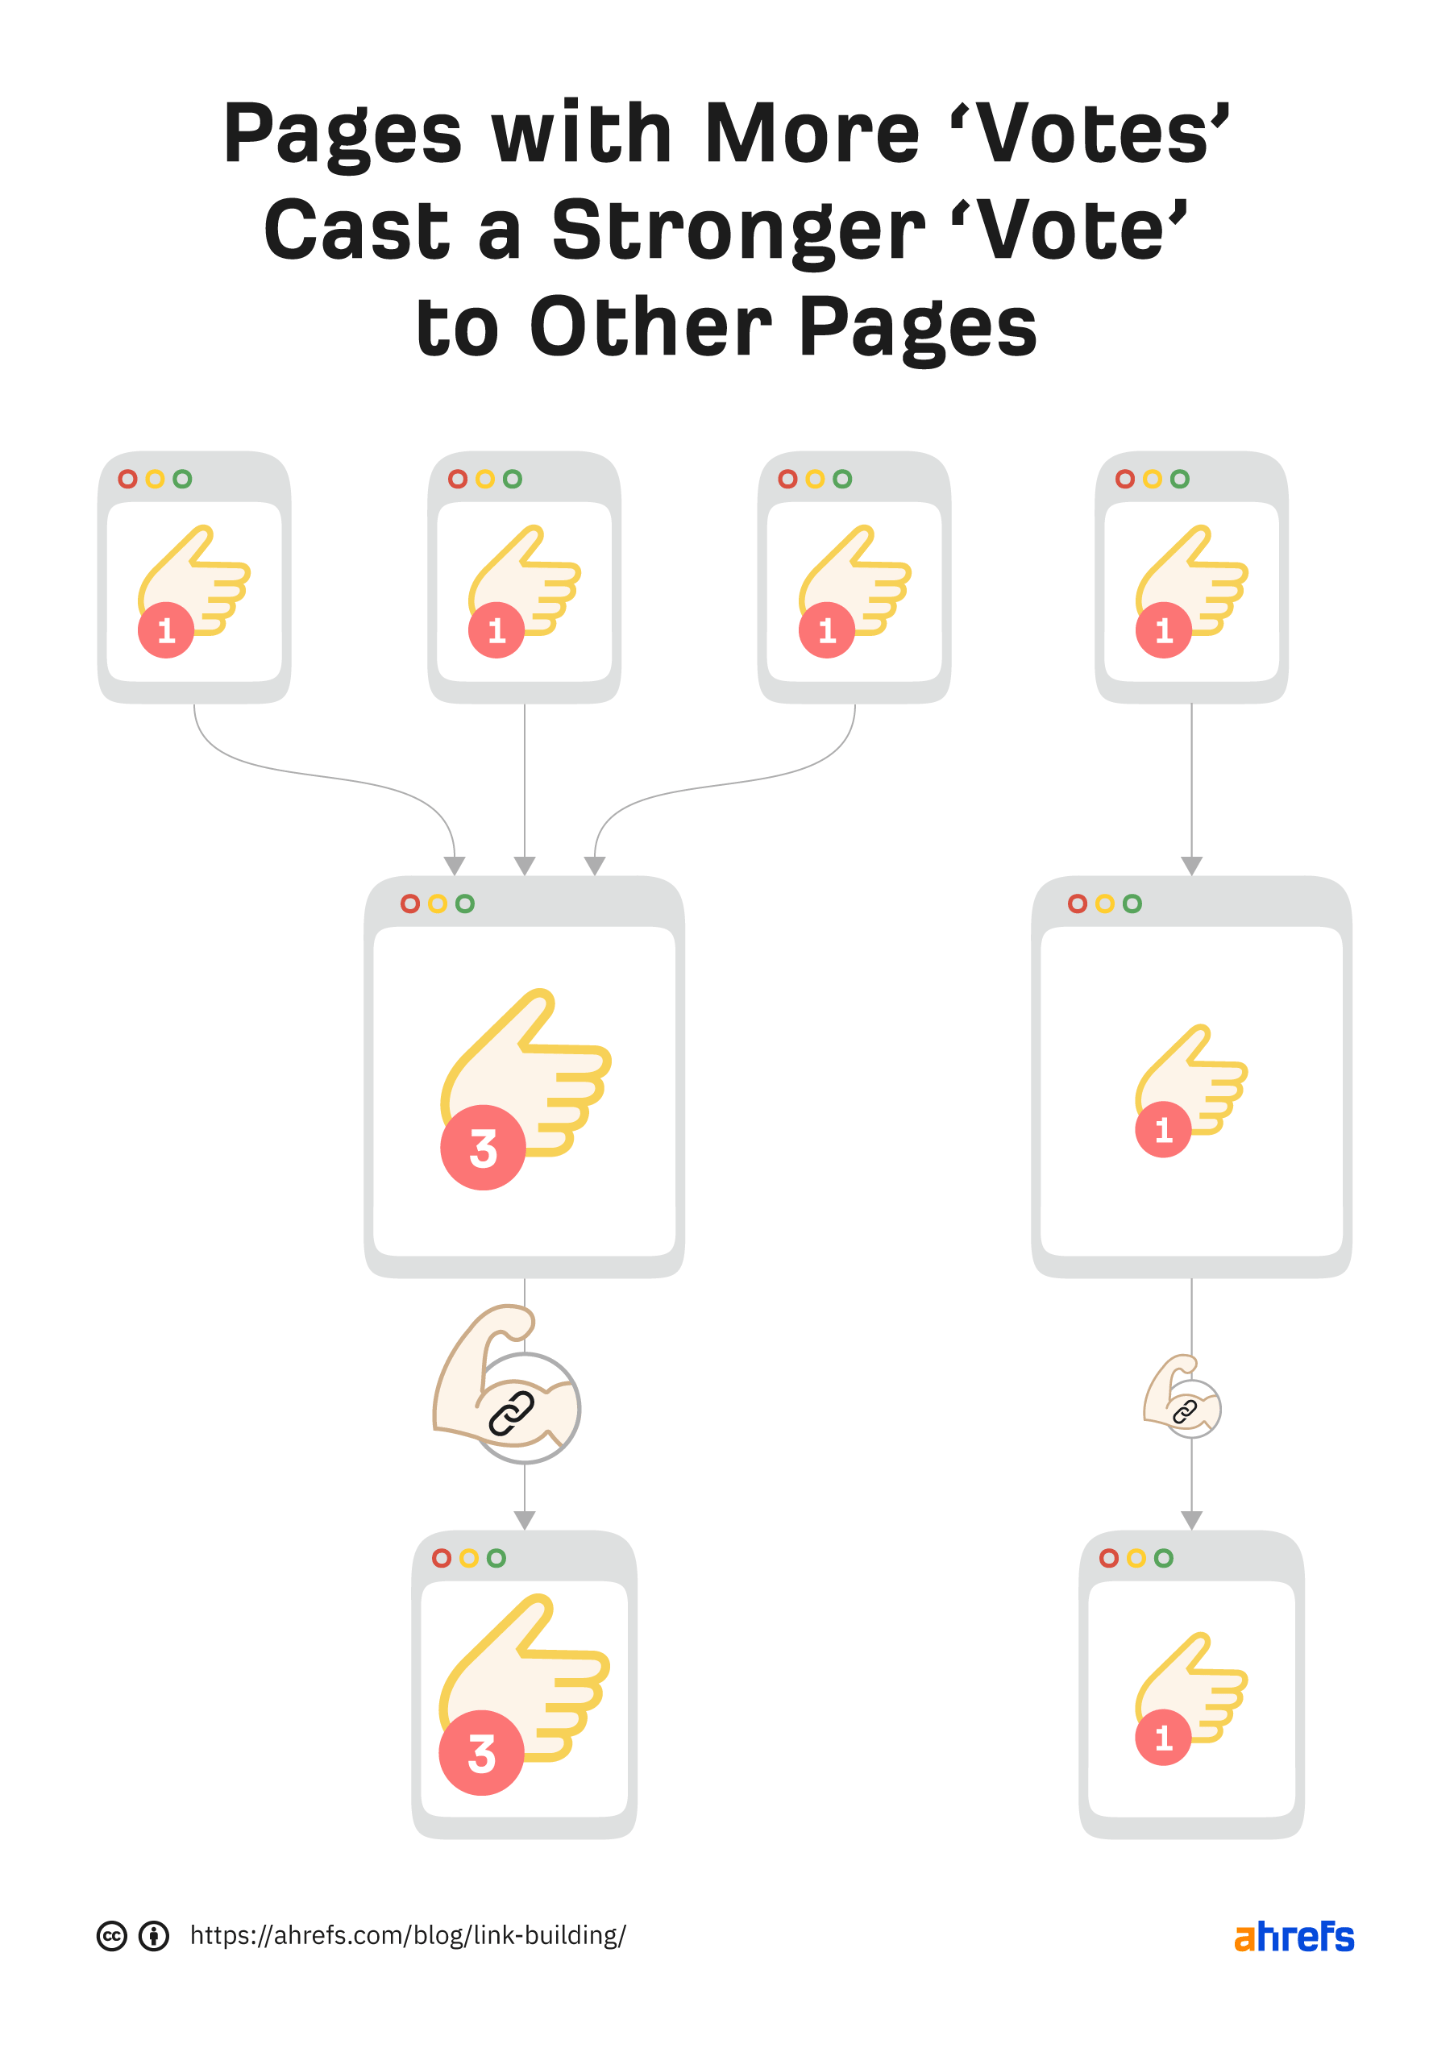 Pages with More votes cast a stronger vote to other pages